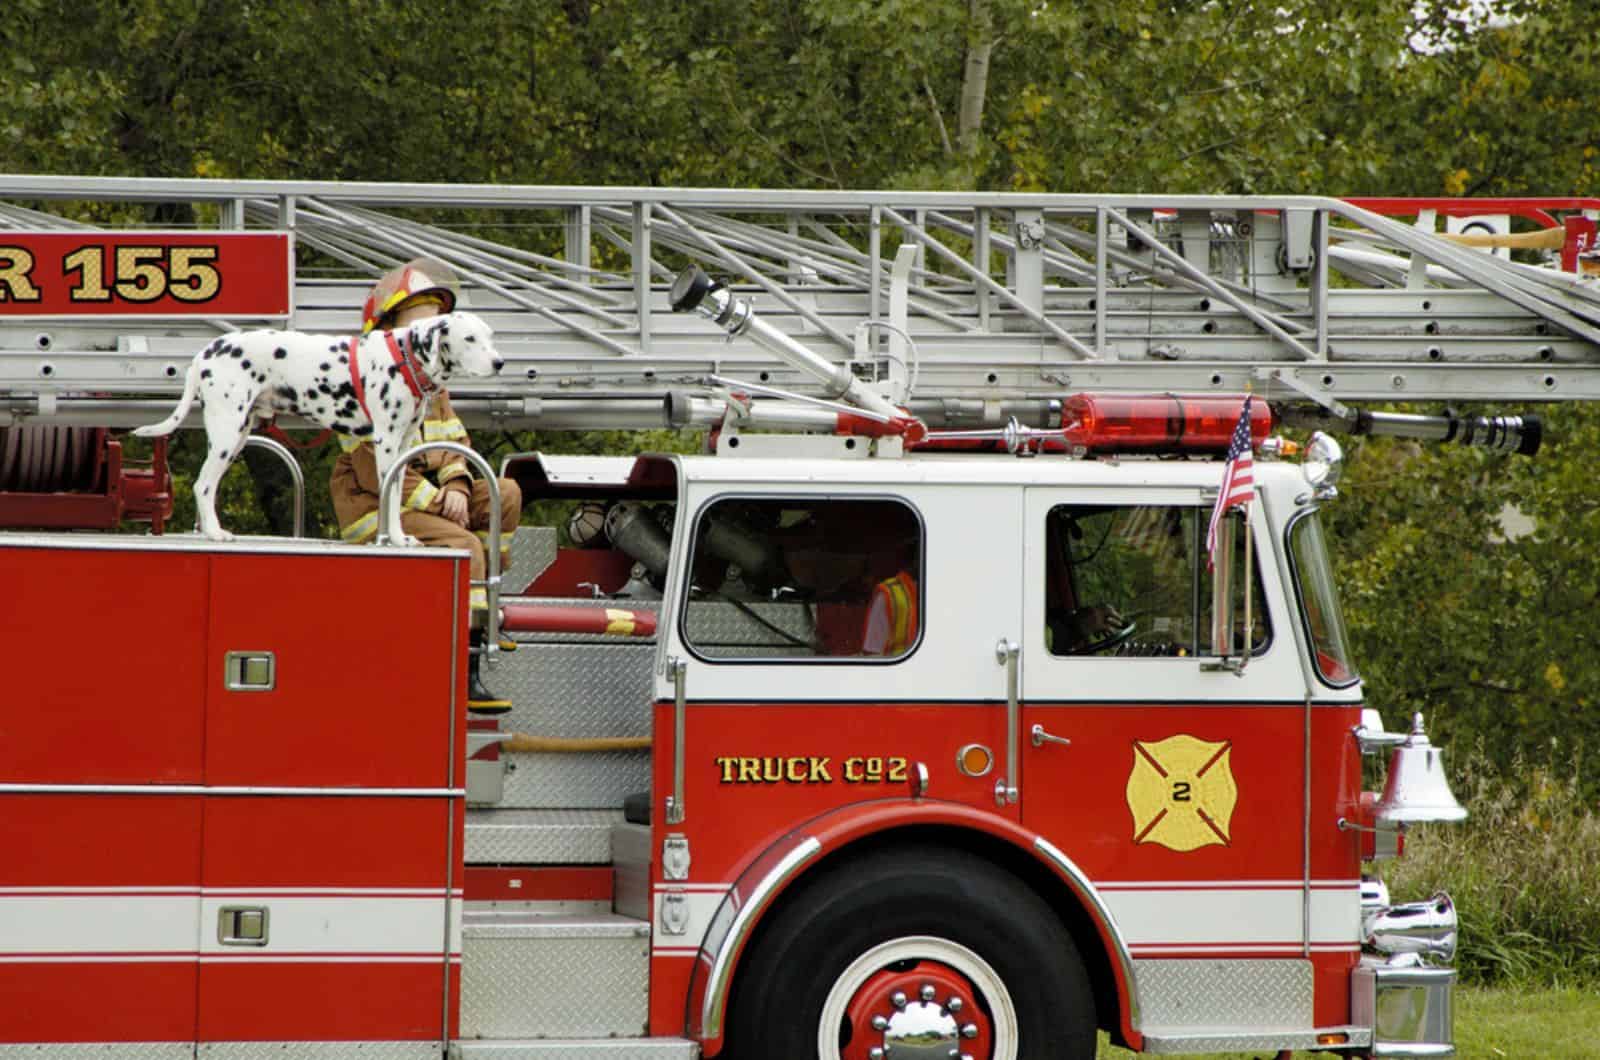 dalmatian dog on fire truck during a fire muster parade